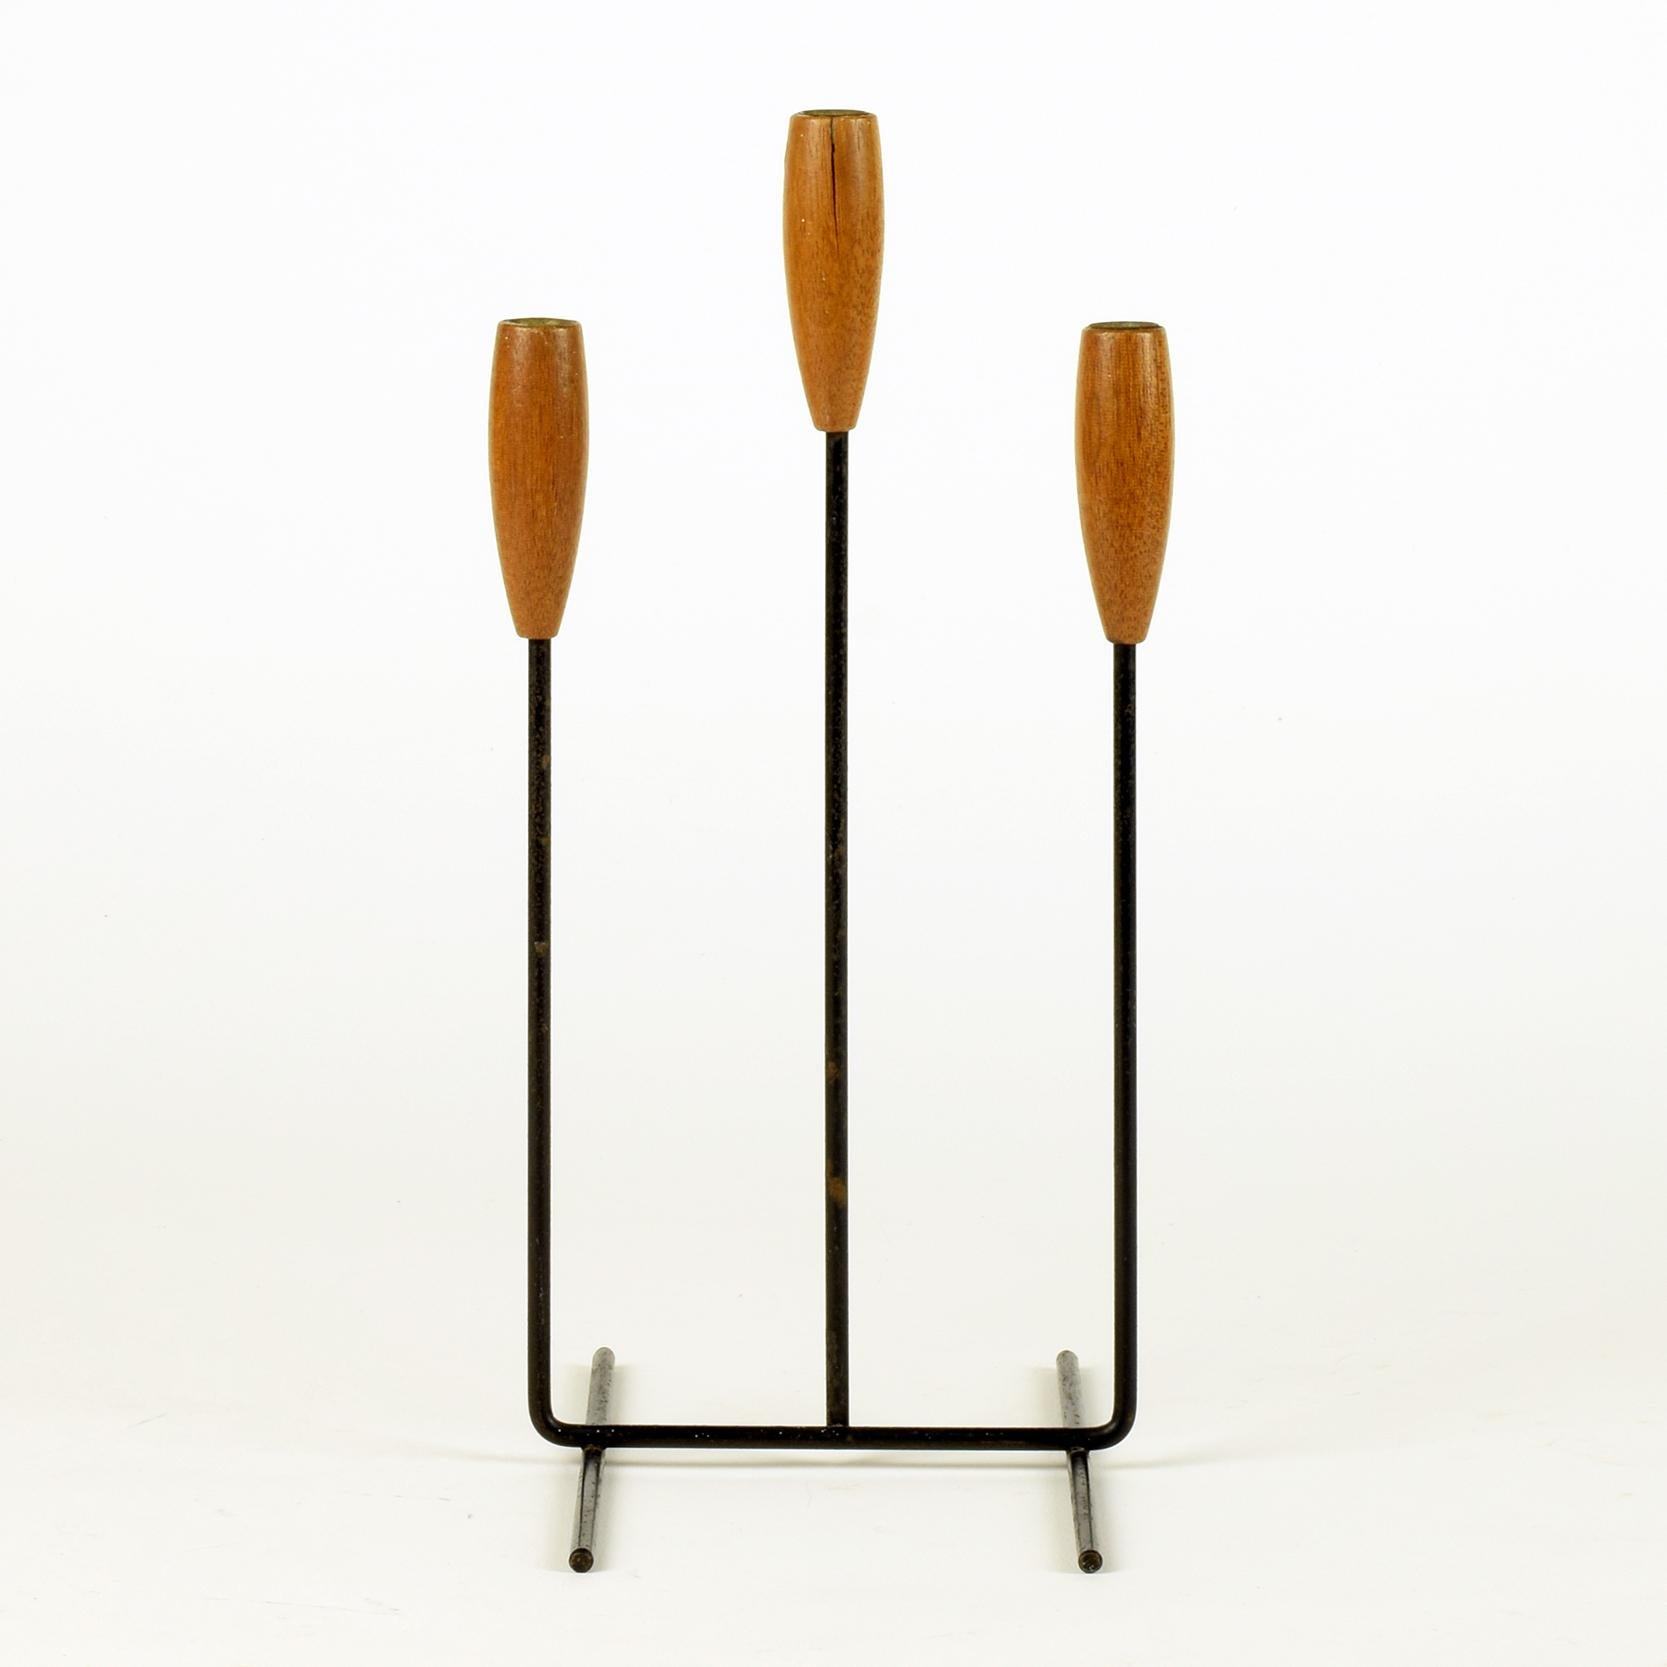 Candleholder for 3 candles, circa 1960

Teak, black metal.

A lovely midcentury item.
Overall very good with good age and patina. Slight split in wood to central holder, but this compliments the vintage feel of the piece.